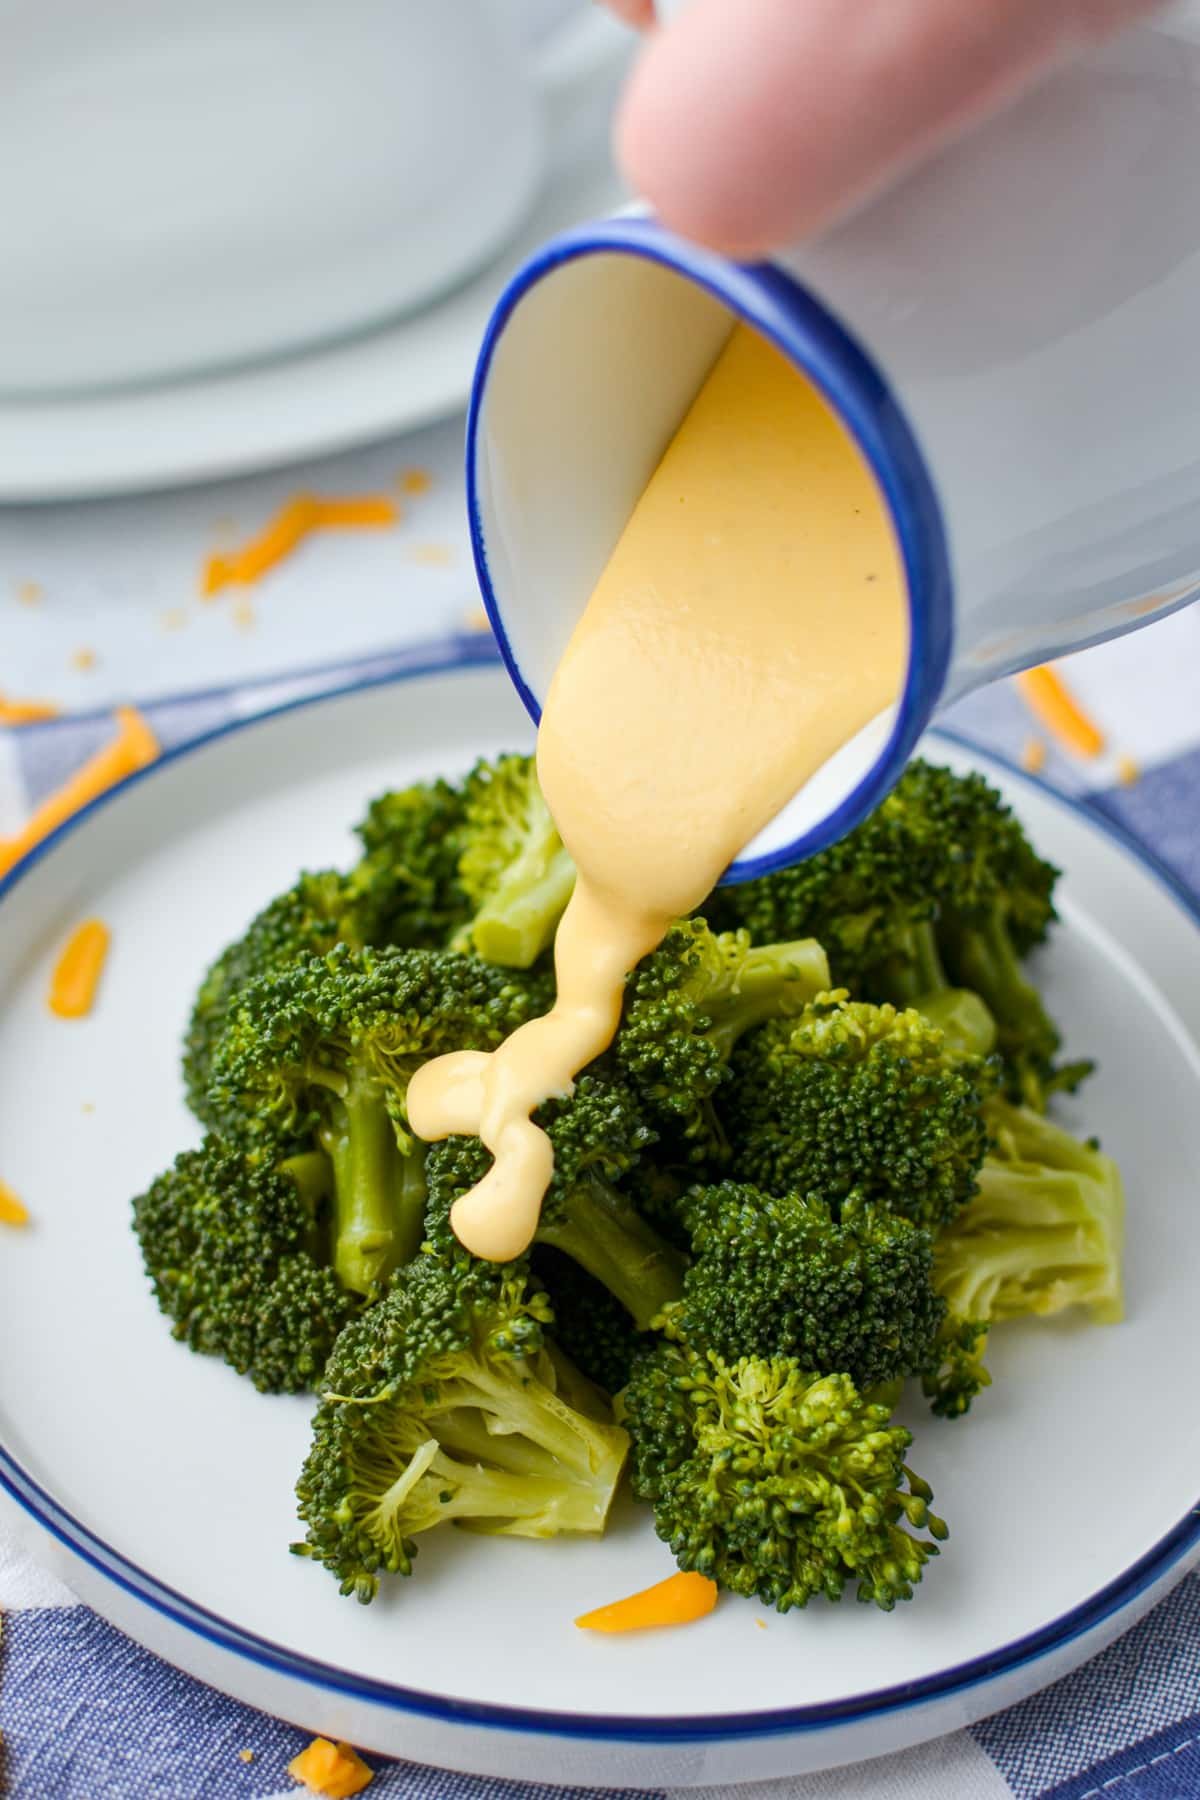 Drizzling cheese sauce on top of broccoli.